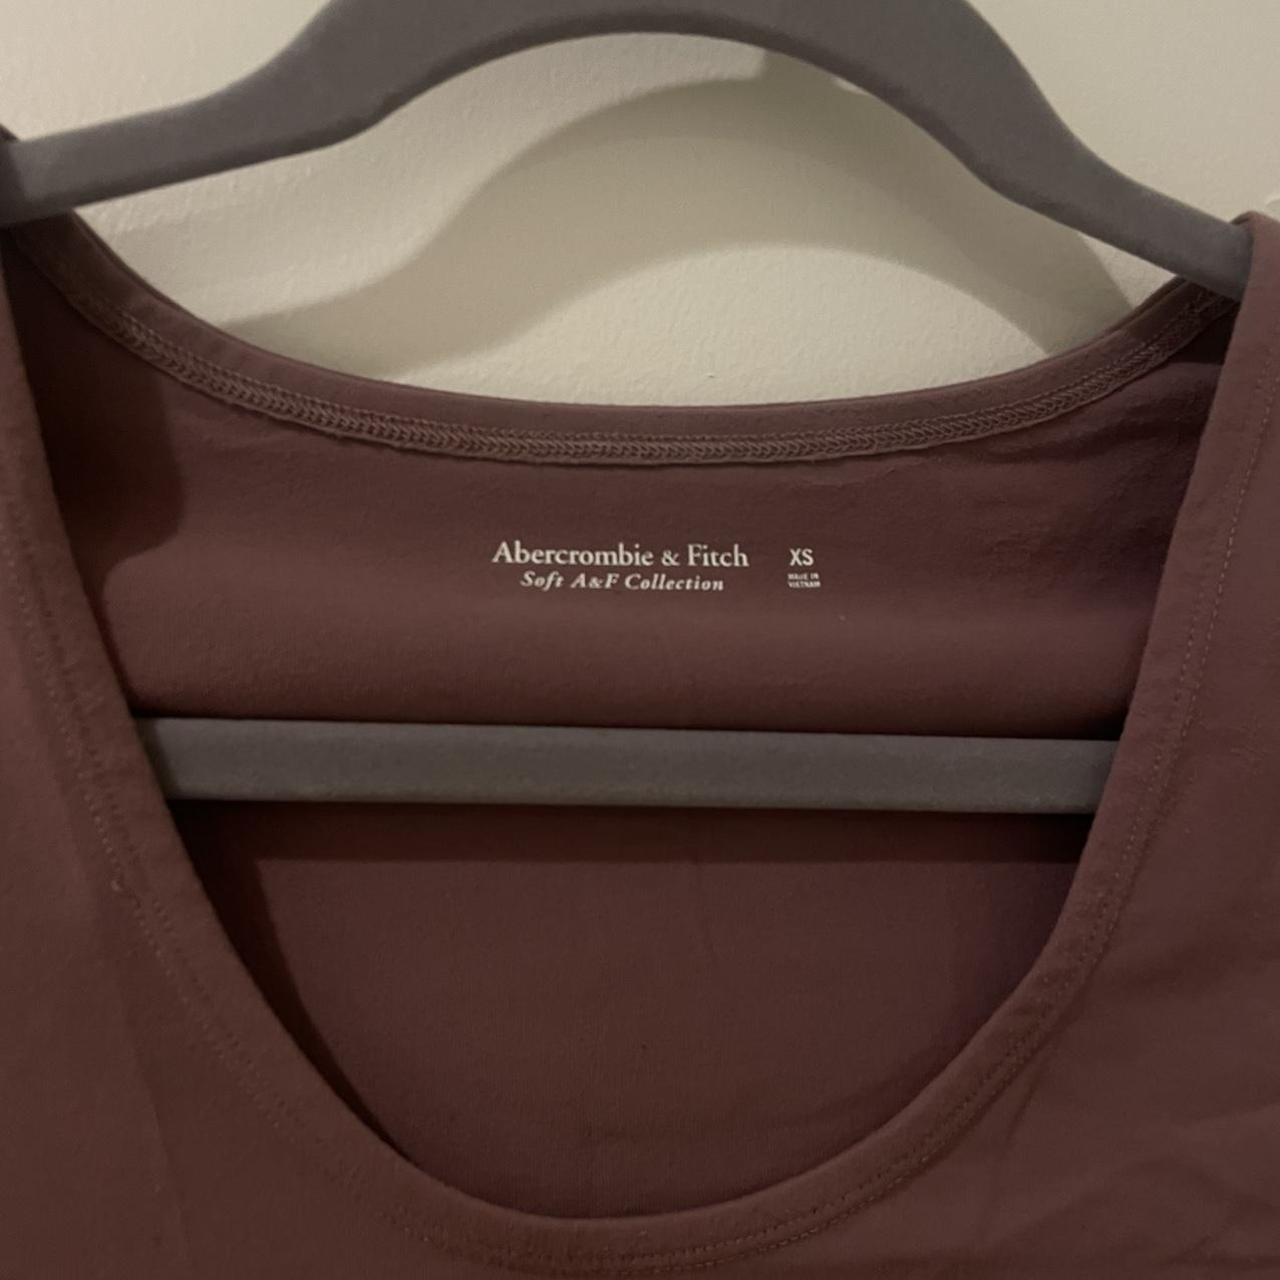 Abercrombie & Fitch Women's Pink and Burgundy Bodysuit (2)